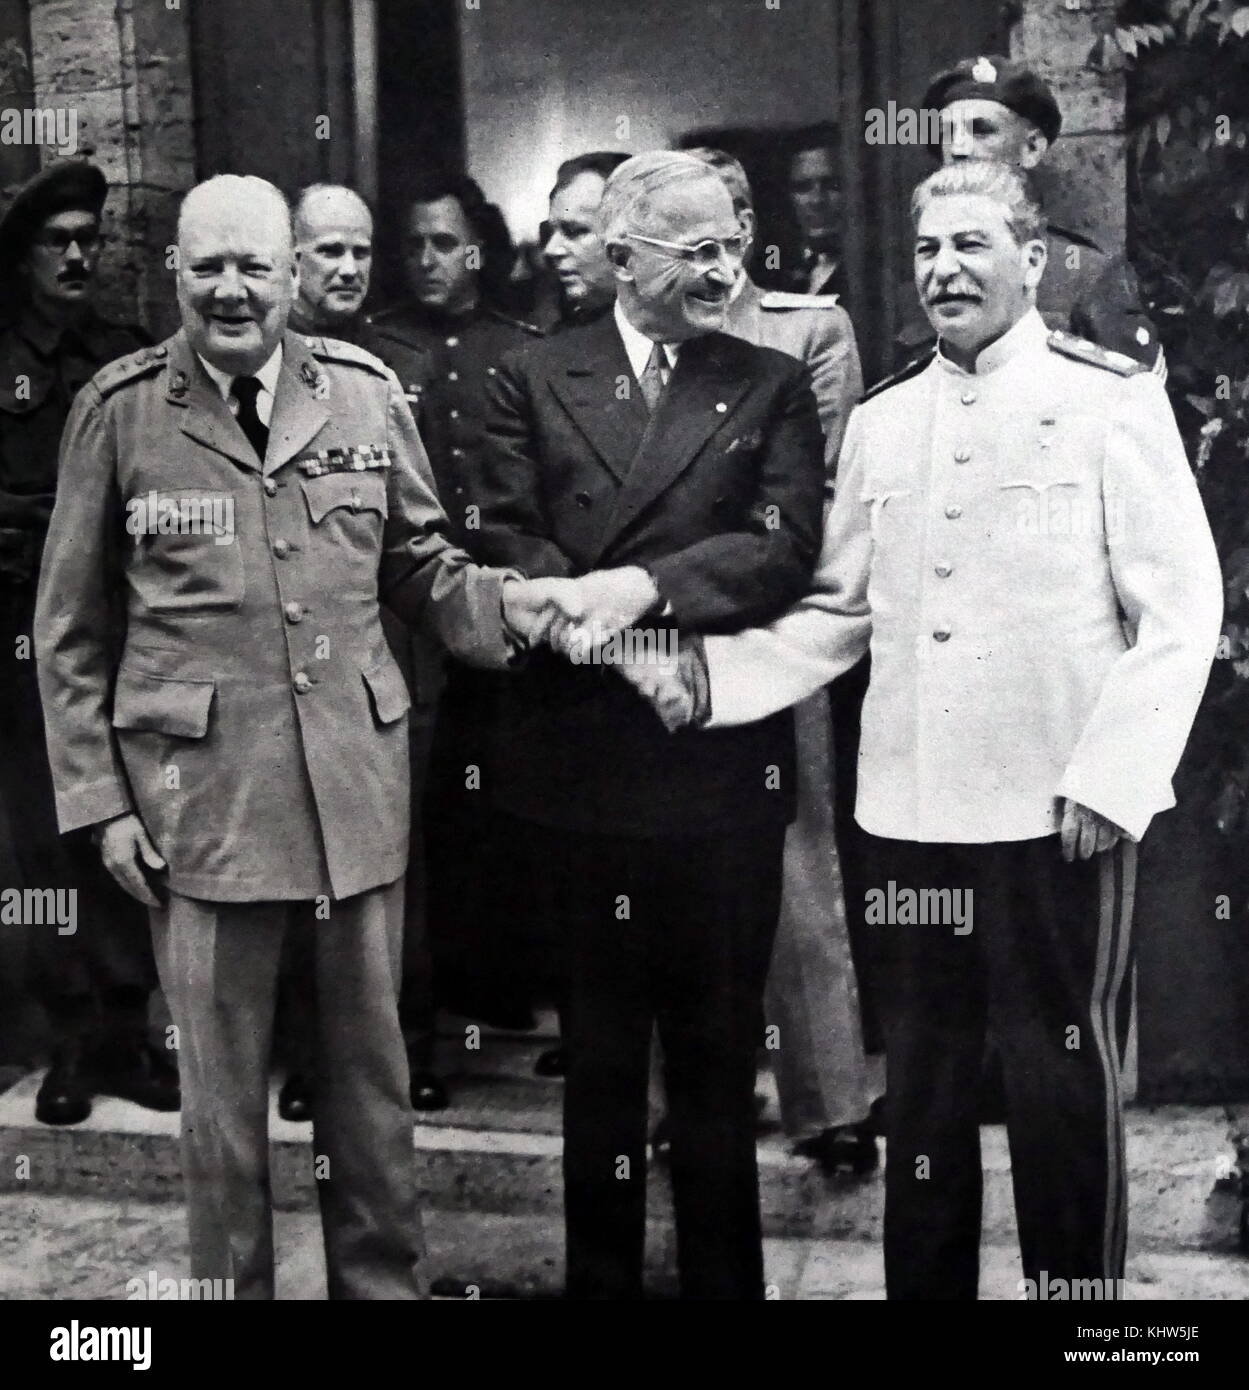 Photograph of President Harry S. Truman, Sir Winston Churchill and Joseph Stalin shaking hands during the Potsdam Conference. Sir Winston Leonard Spencer-Churchill (1874-1965) a British politician and Prime Minister of the United Kingdom. Harry S. Truman (1884-1972) the 33rd President of the United States. Joseph Stalin (1878-1953) a Soviet revolutionary, political leader, and Premier of the Soviet Union. Dated 20th Century Stock Photo